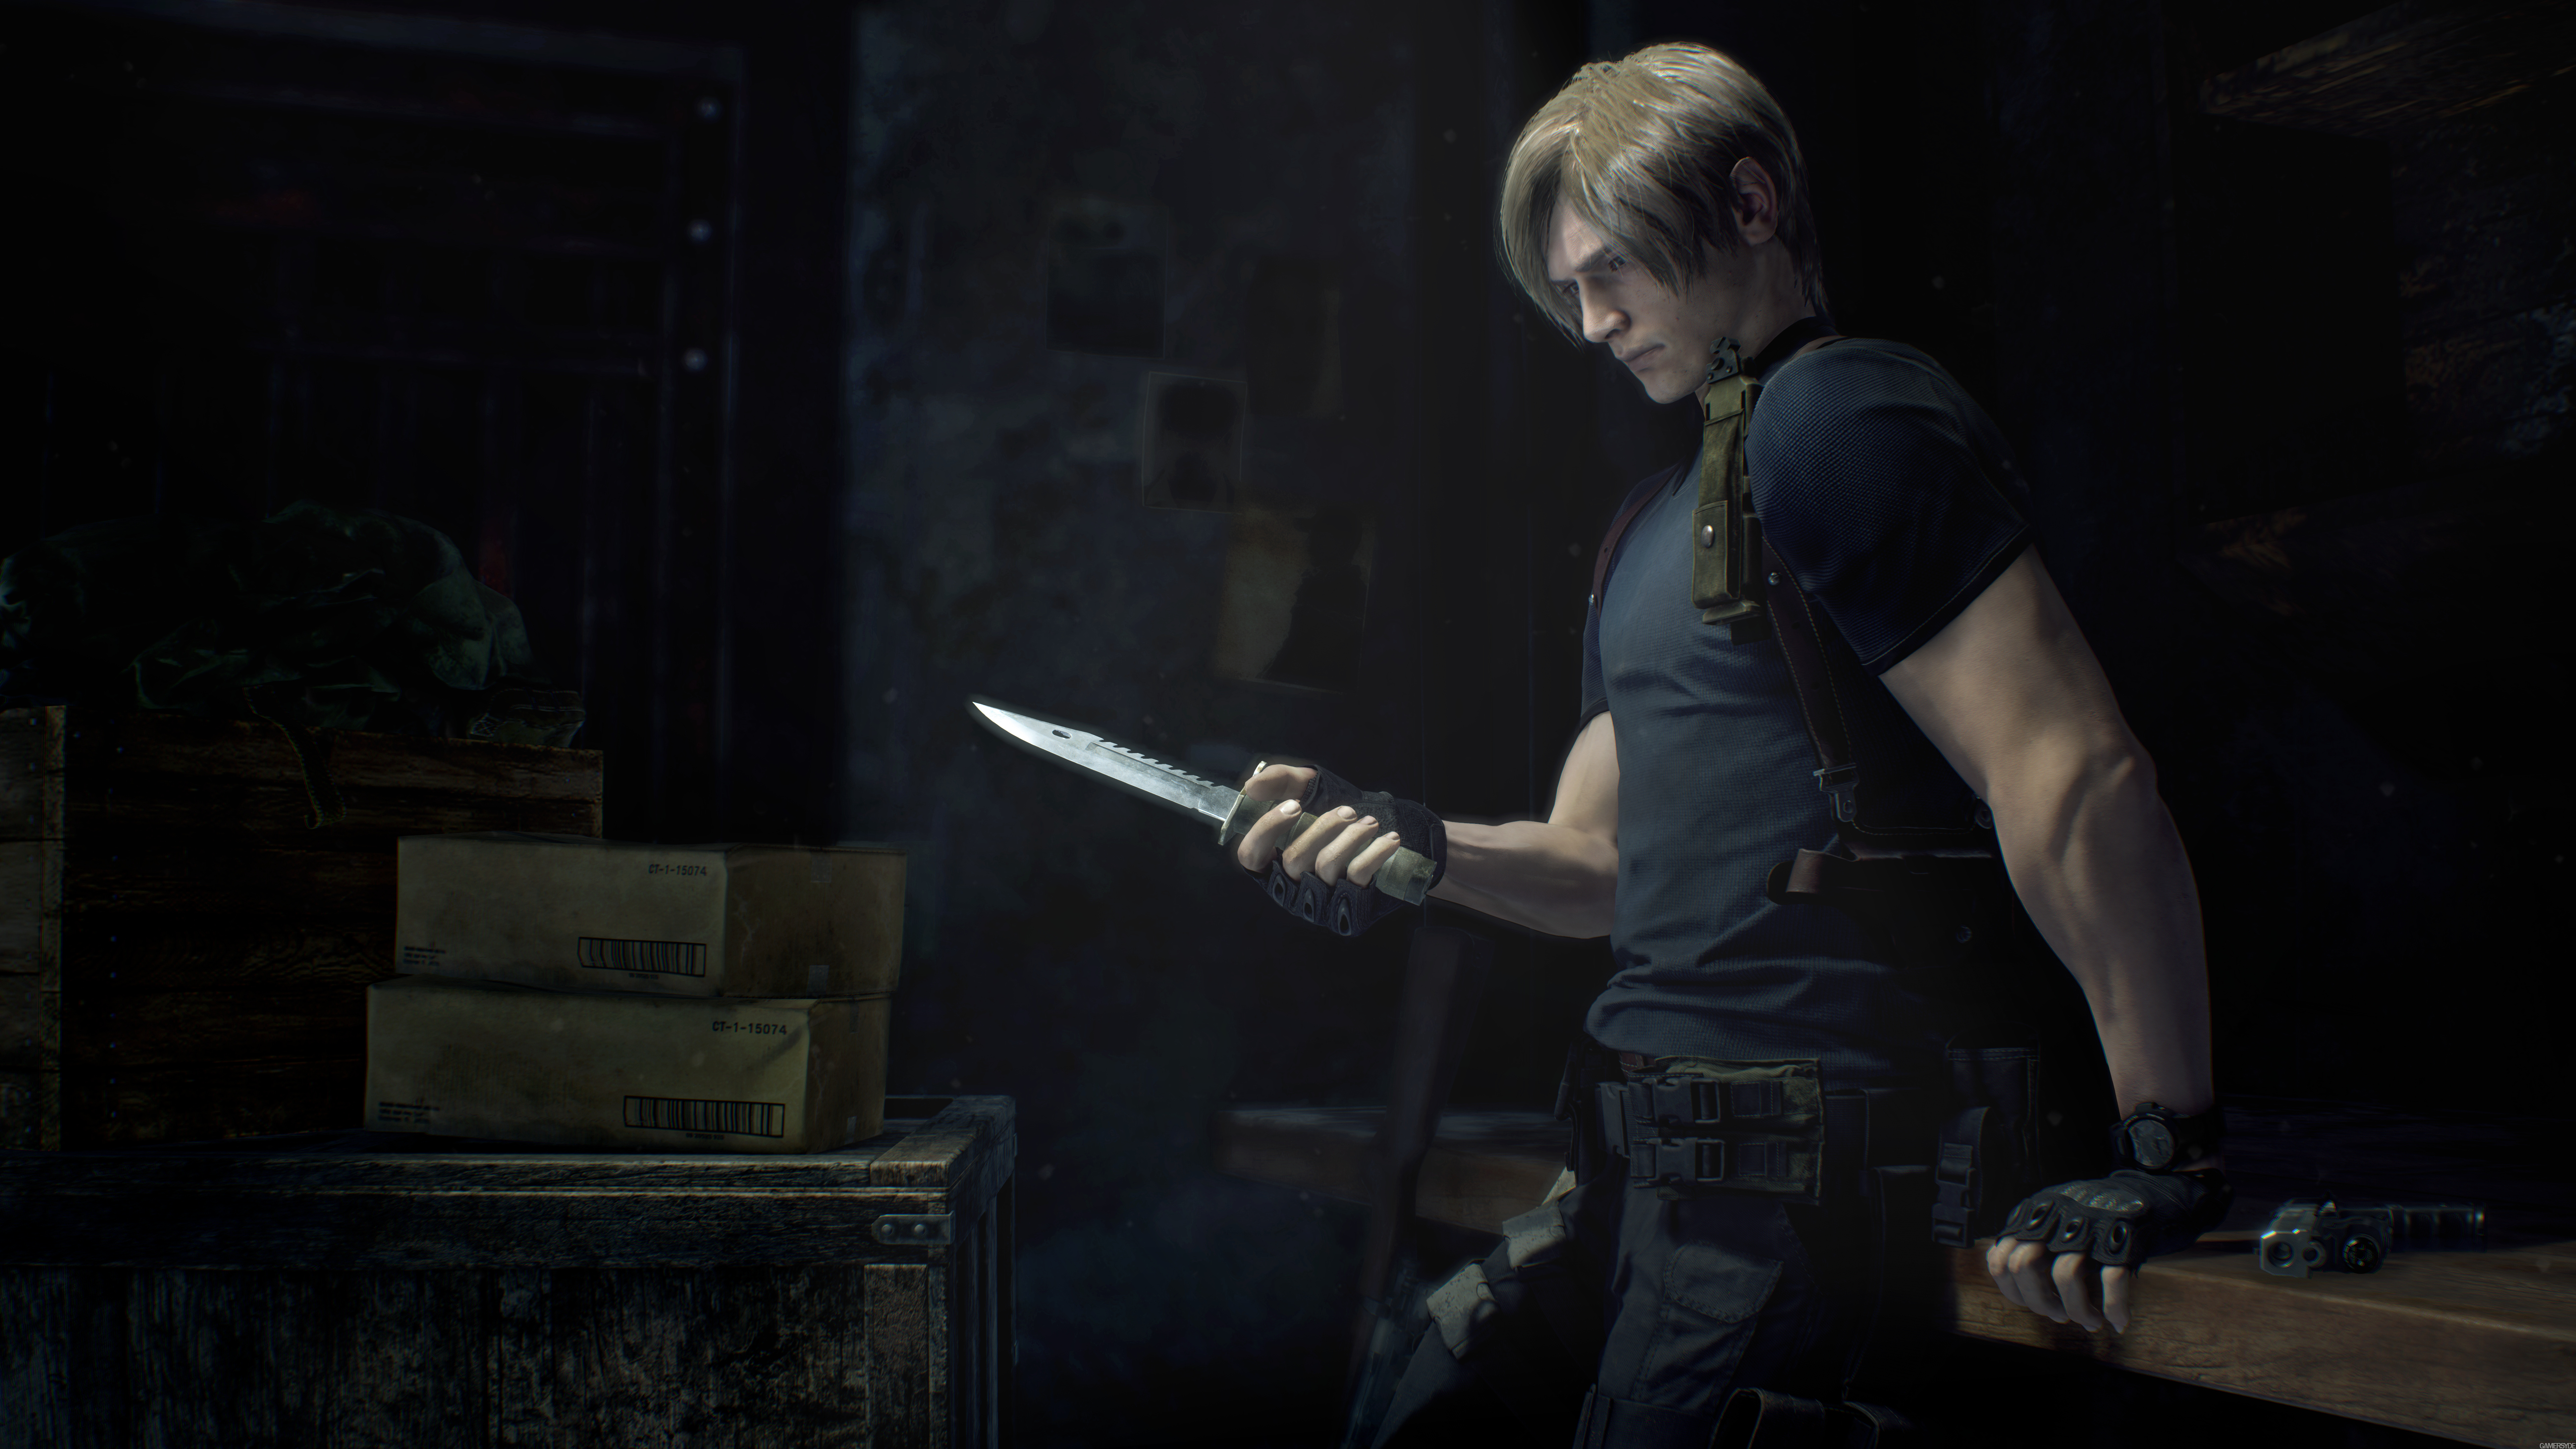 Resident Evil 4 Remake Won't Let You Throw Ashley in a Dumpster Anymore